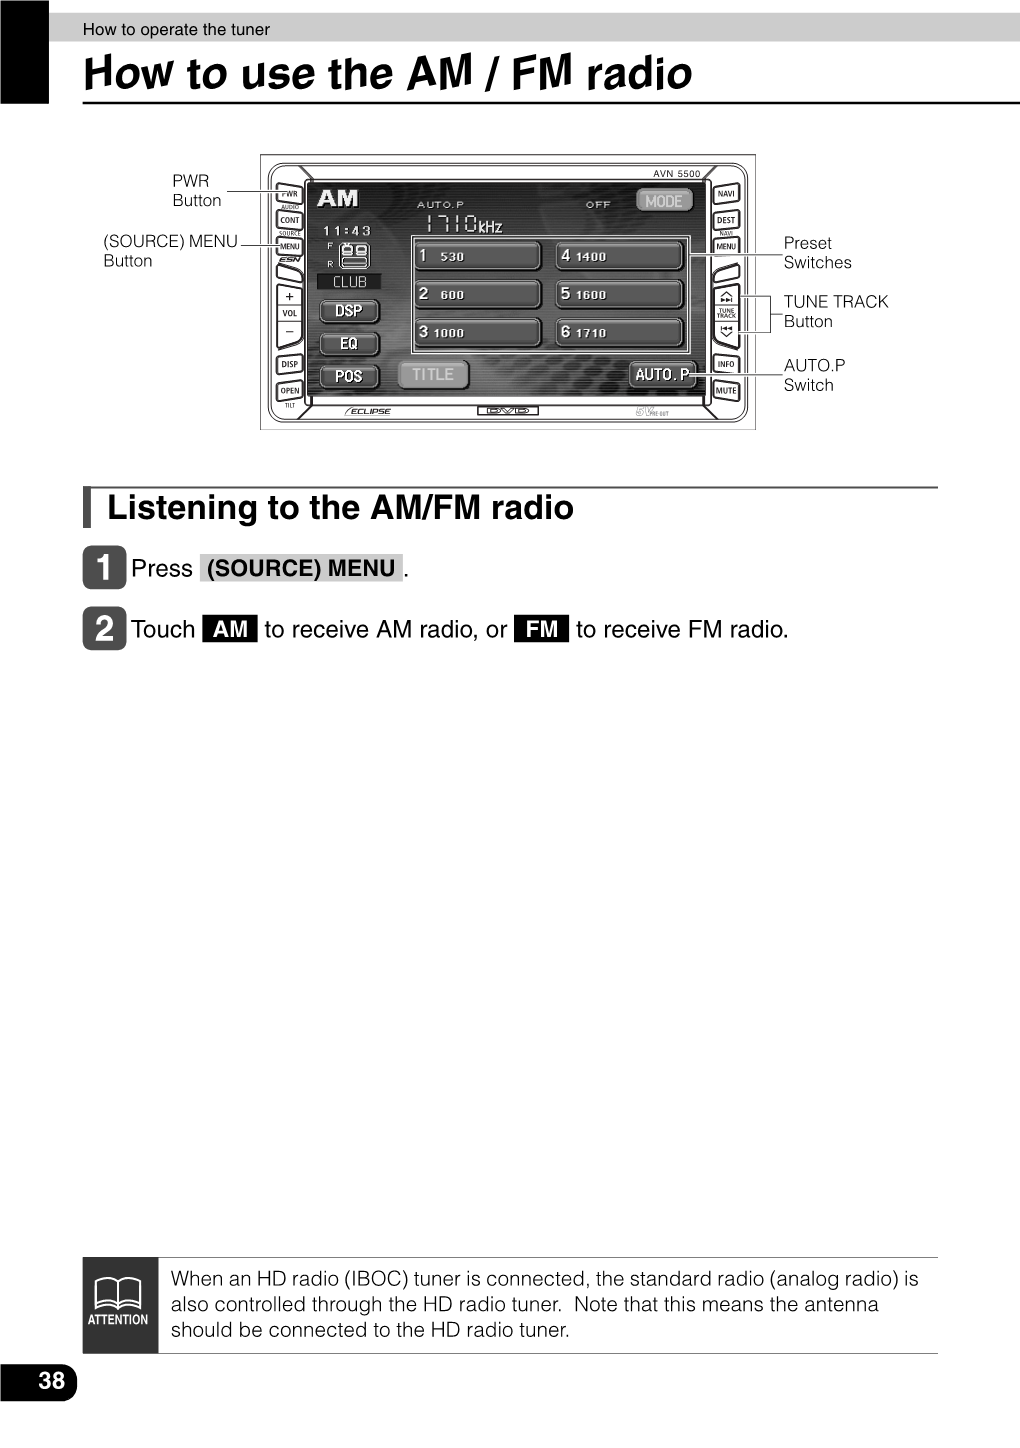 How to Use the AM / FM Radio